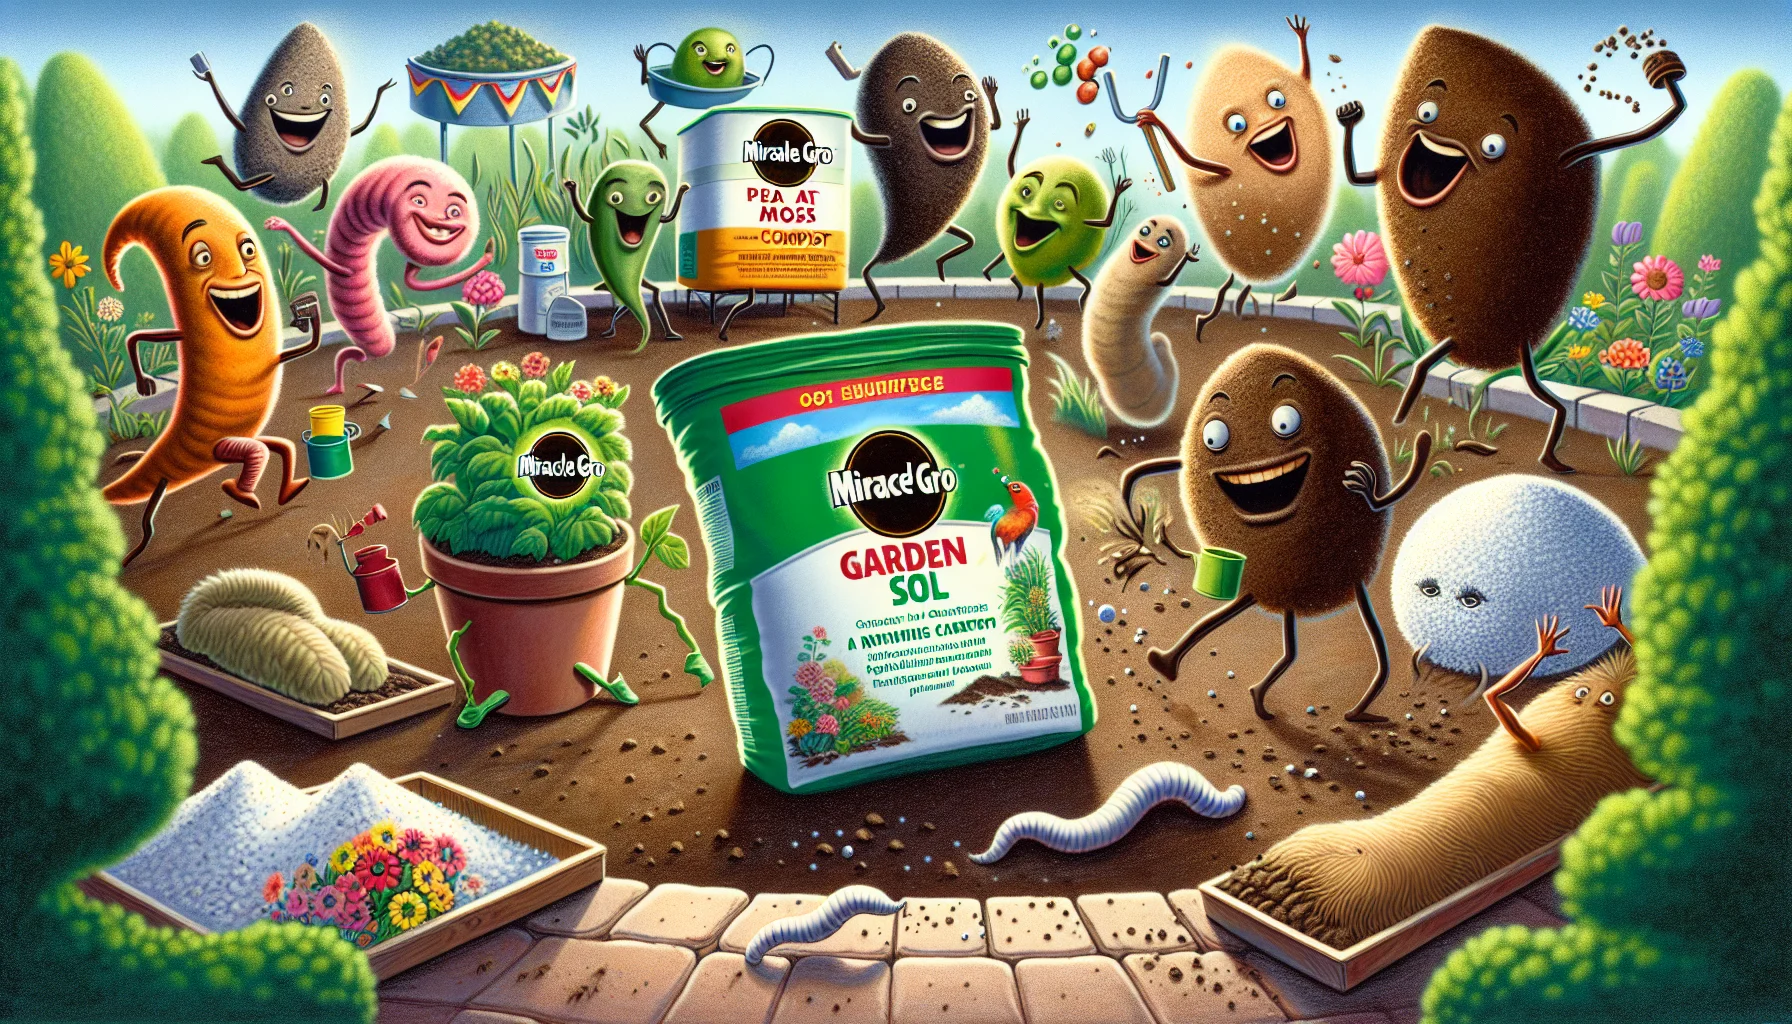 A whimsical depiction of Miracle Gro garden soil ingredients coming to life in humorous ways to demonstrate their benefits for plants. Imagine peat moss throwing a party for earthworms, compost participating in a beauty contest showing off its nutrient-rich attributes, or perlite, the miniature white balls in the soil, having a fun race around the garden. All these depicted in a lively, vibrant scene stirred with playful interactions suggestive of the joys of gardening.